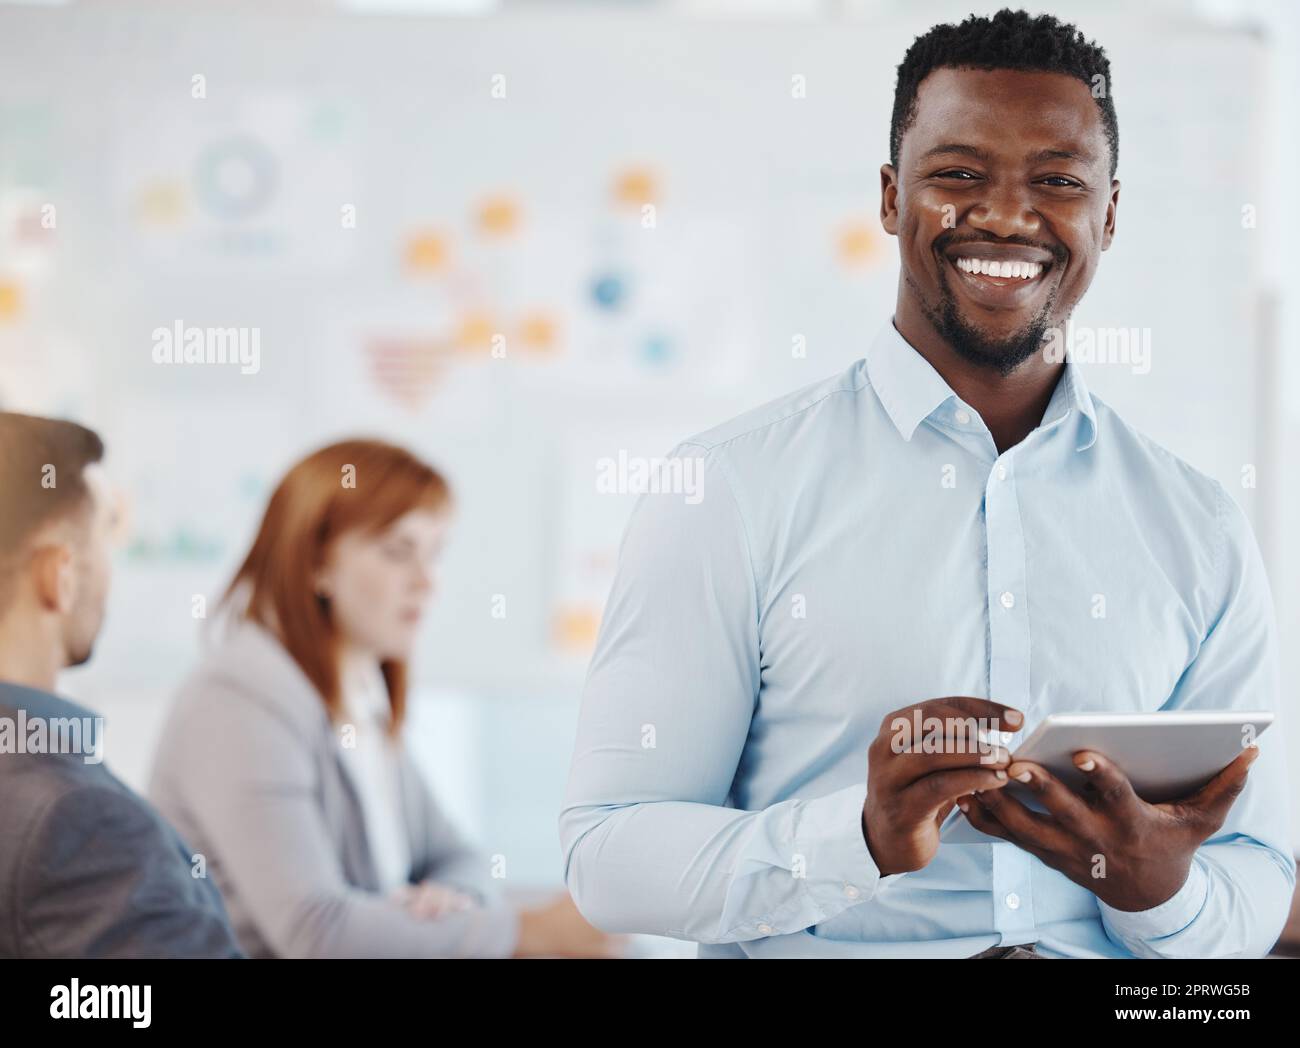 Leadership, motivation and business man planning on digital tablet and looking proud in a group meeting. Strategy, vision and marketing by black man portrait leading a design team mission discussion Stock Photo